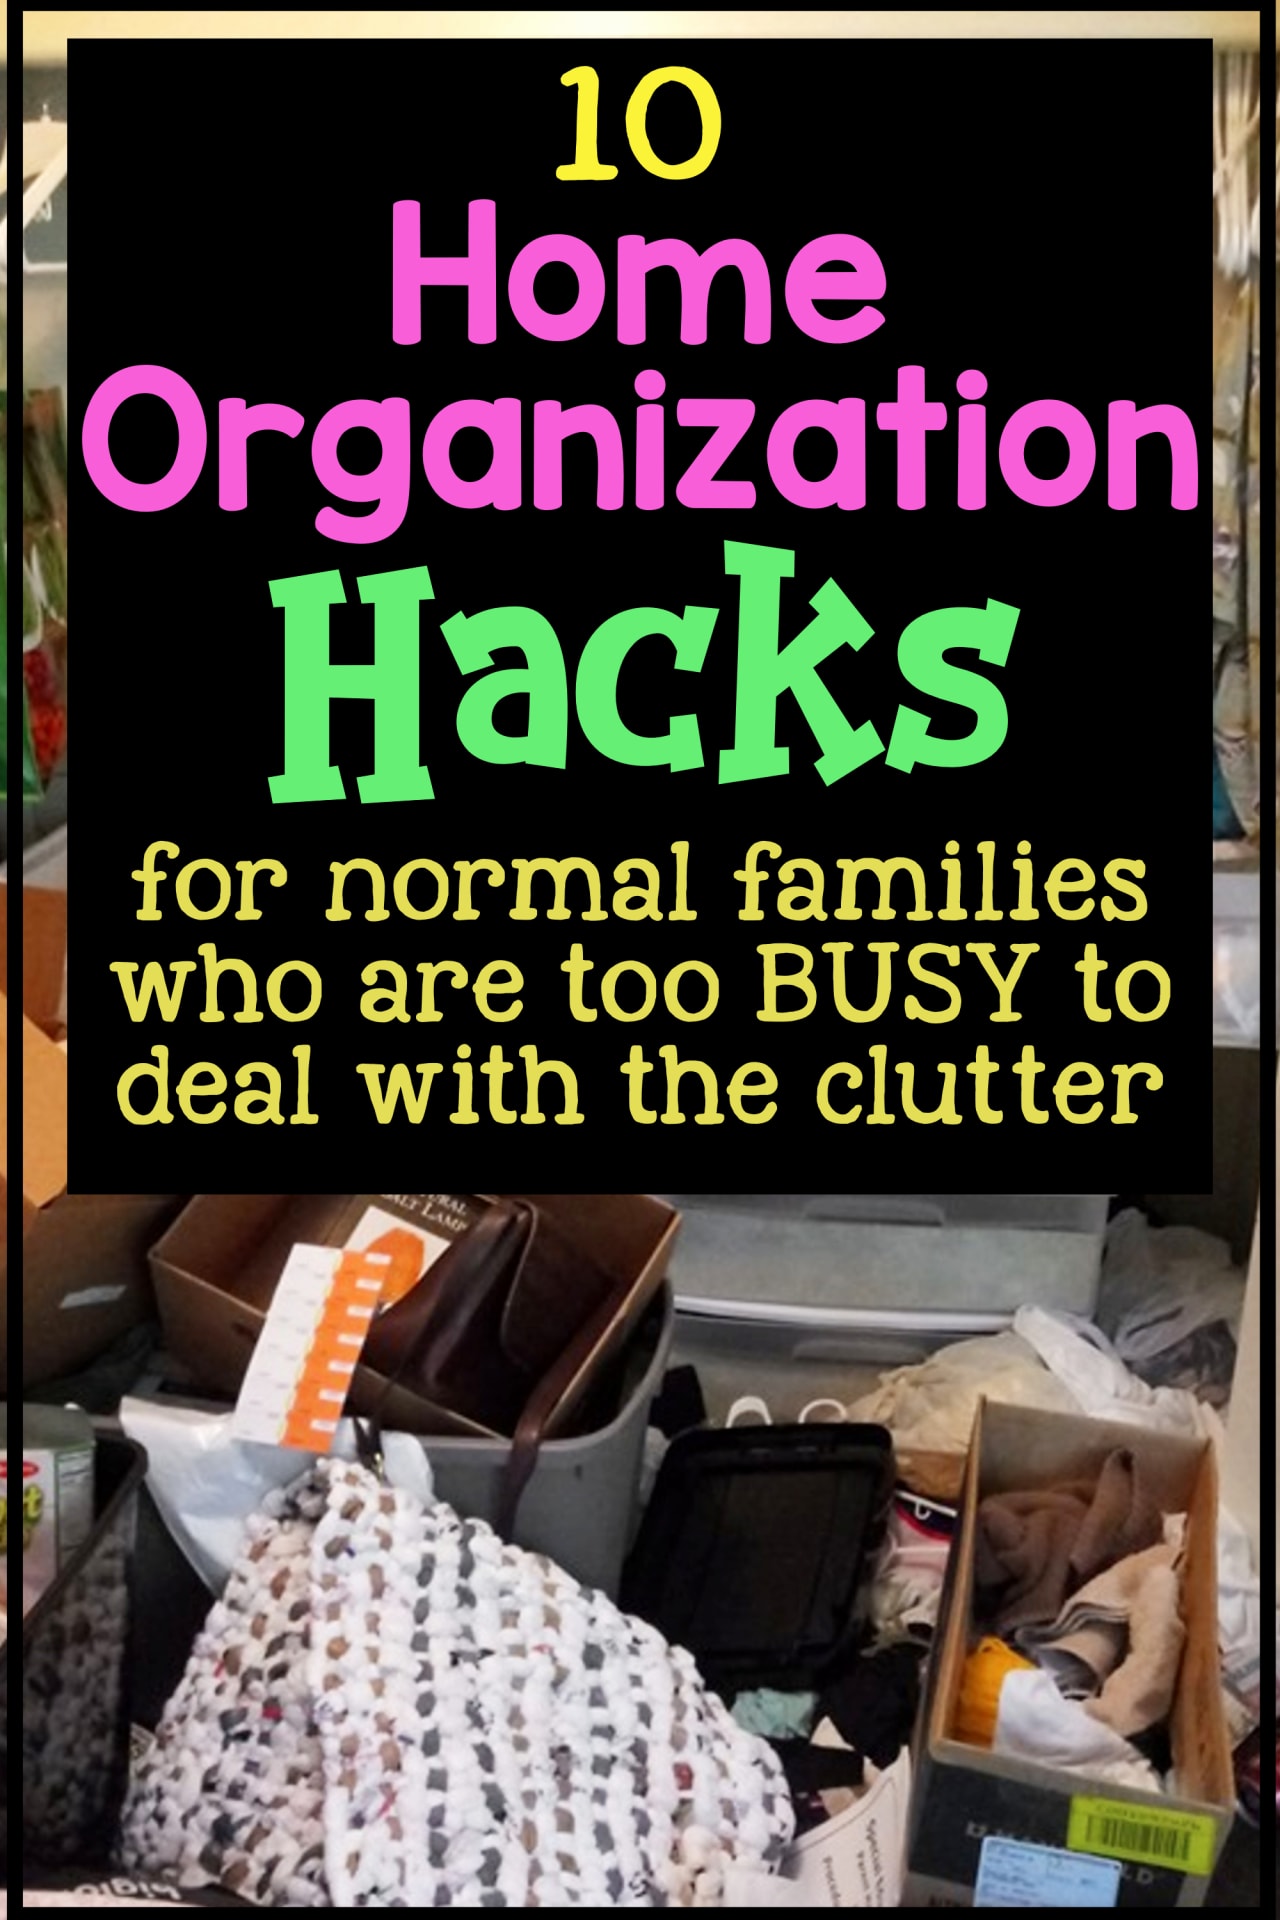 10 Home Organization Hacks For NORMAL Families - feeling overwhelmed by your messy house?  Trying to UNclutter your home and declutter your life?  These home organization hacks make getting organized at home LESS overwhelming even if you're on a budget, a working mom or can't get motivated to clean